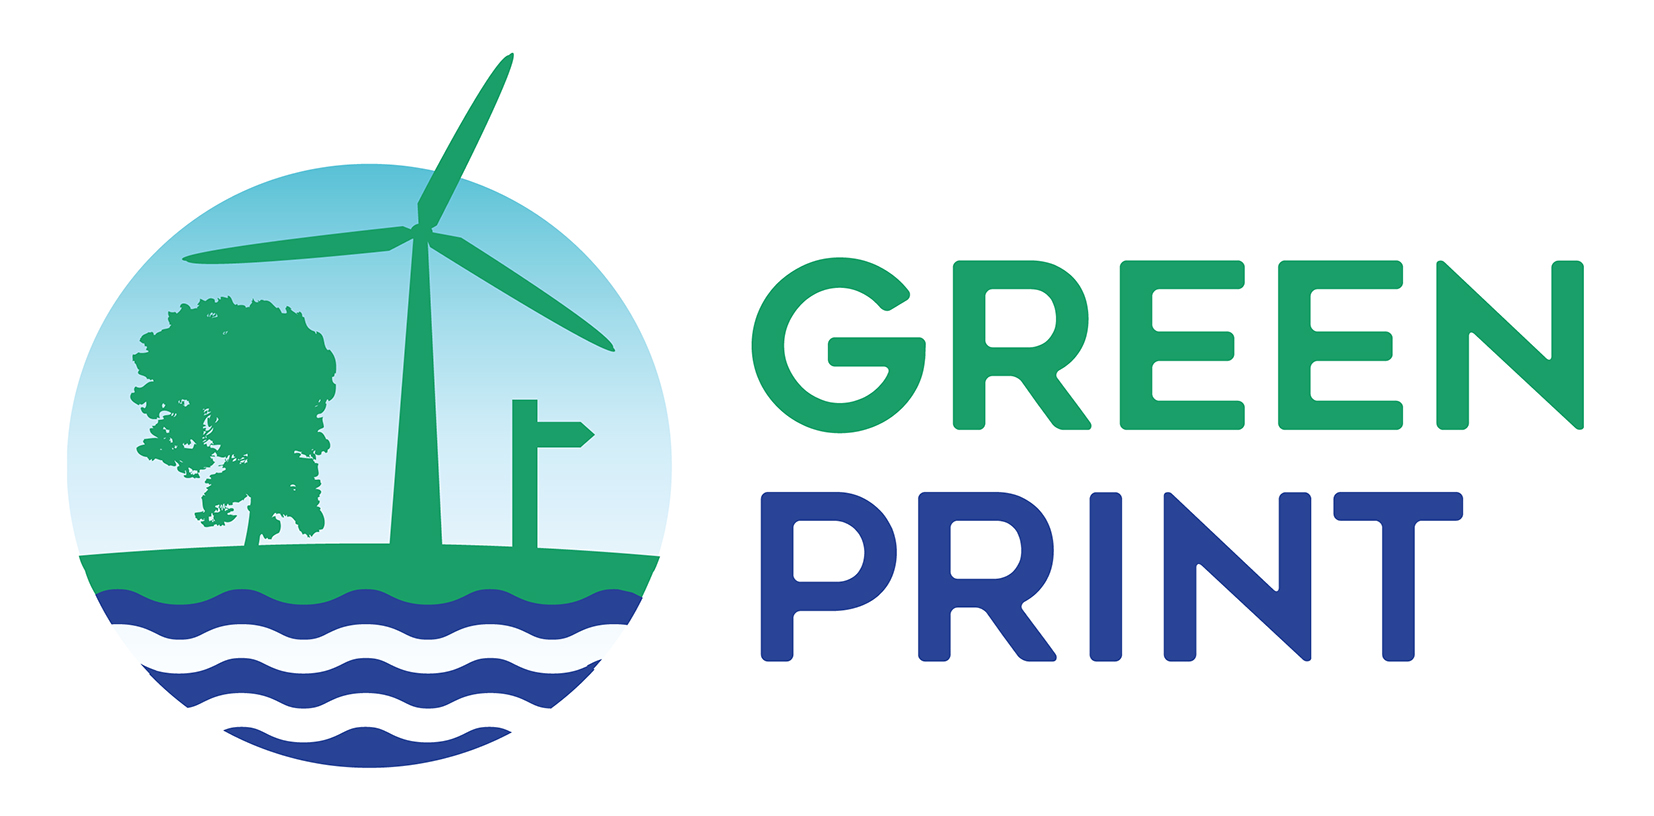 Greenprint Forum logo - an illustration representing the sea, green land, a tree, a public footpath sign and a wind turbine all in blue and green